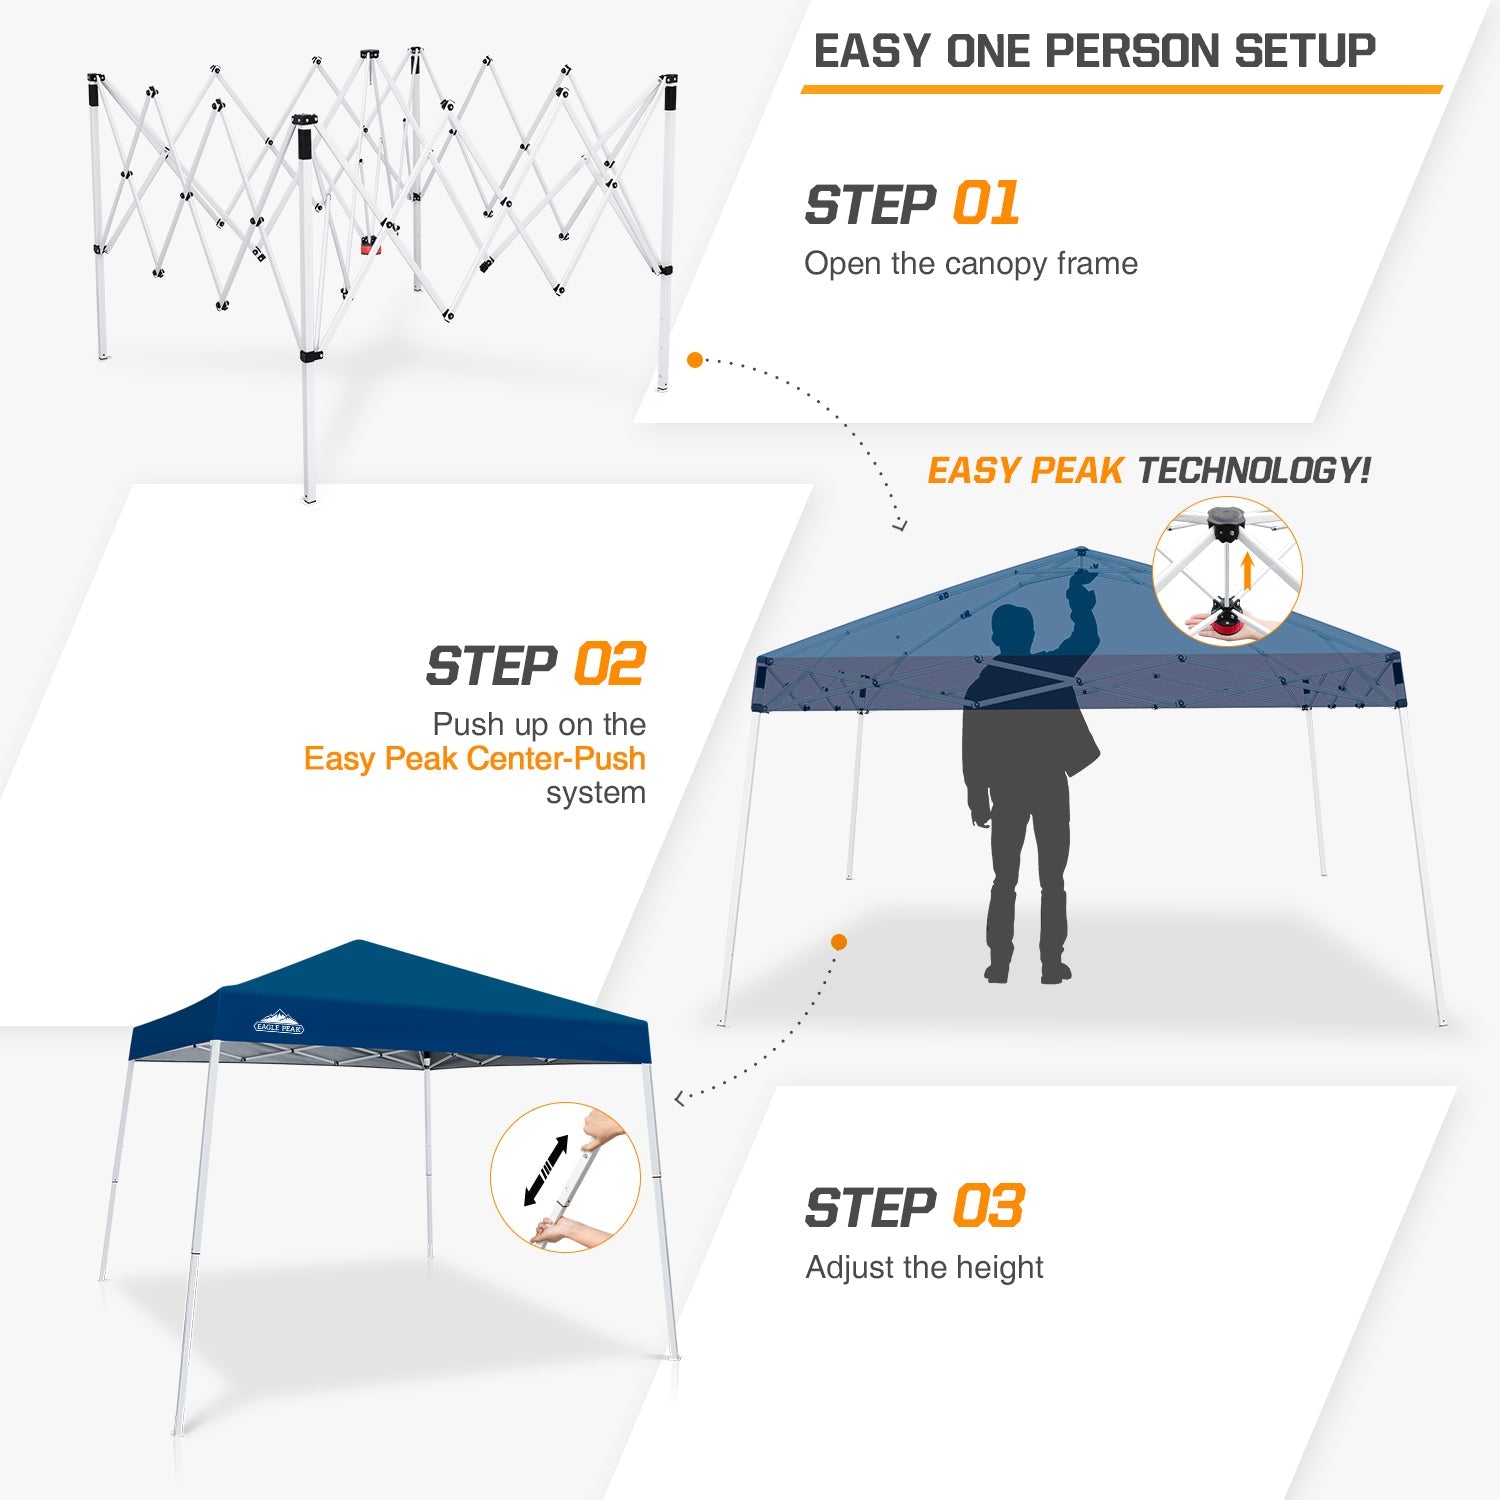 EAGLE PEAK 10' x 10' Slant Leg Pop-up Canopy Tent Easy One Person Setup Instant Outdoor Canopy Folding Shelter with 64 Square Feet of Shade (Dark Blue)